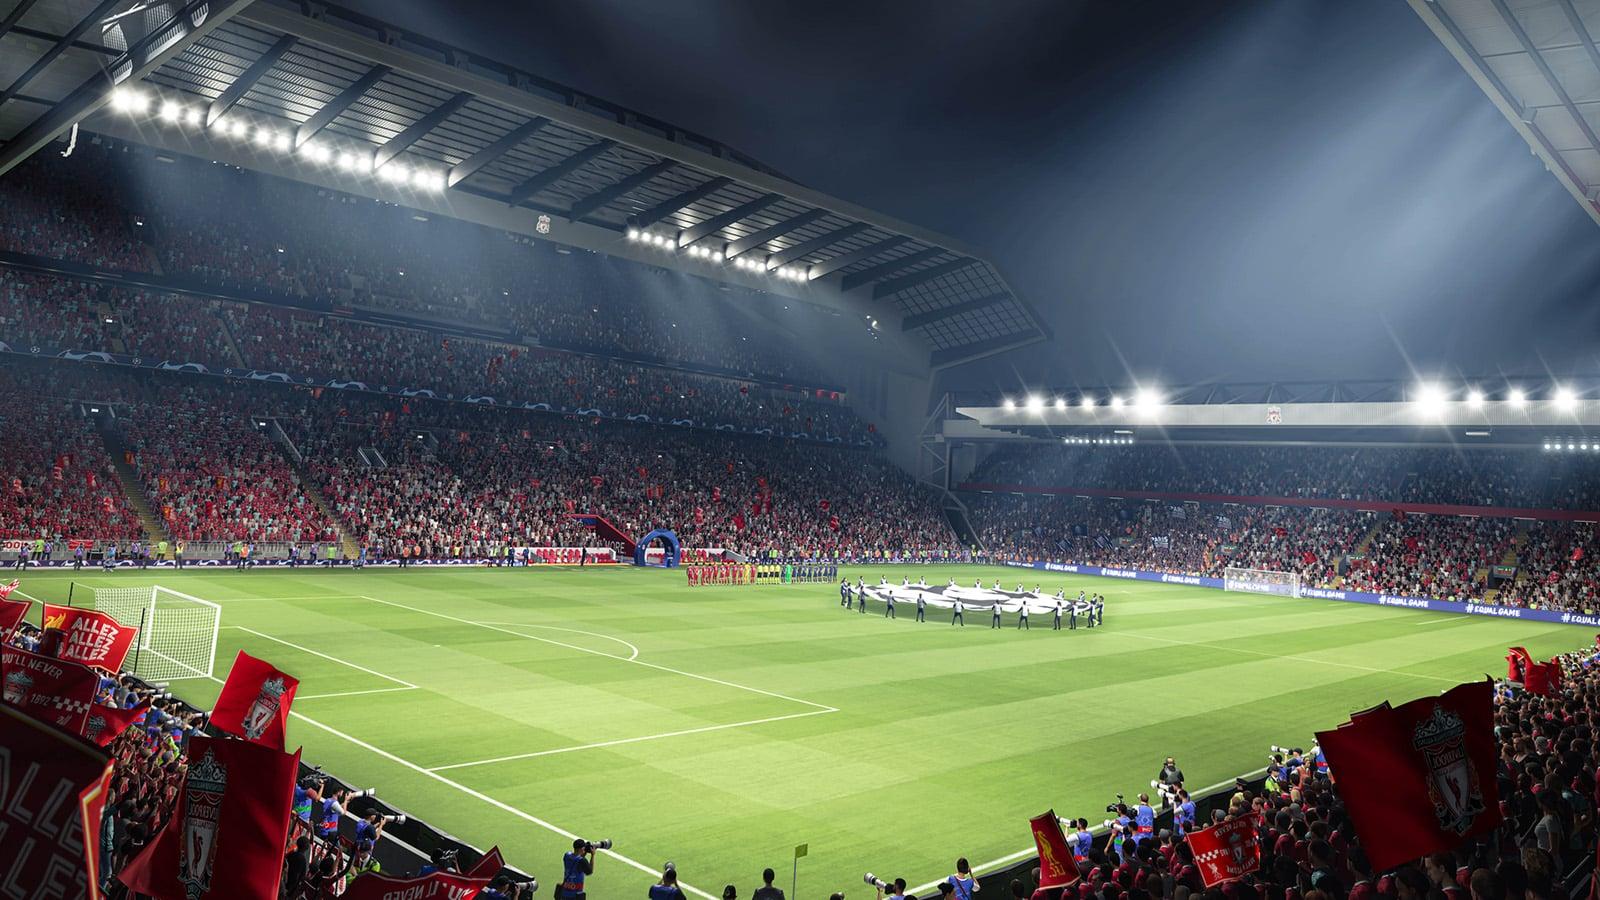 Anfield in FIFA 22